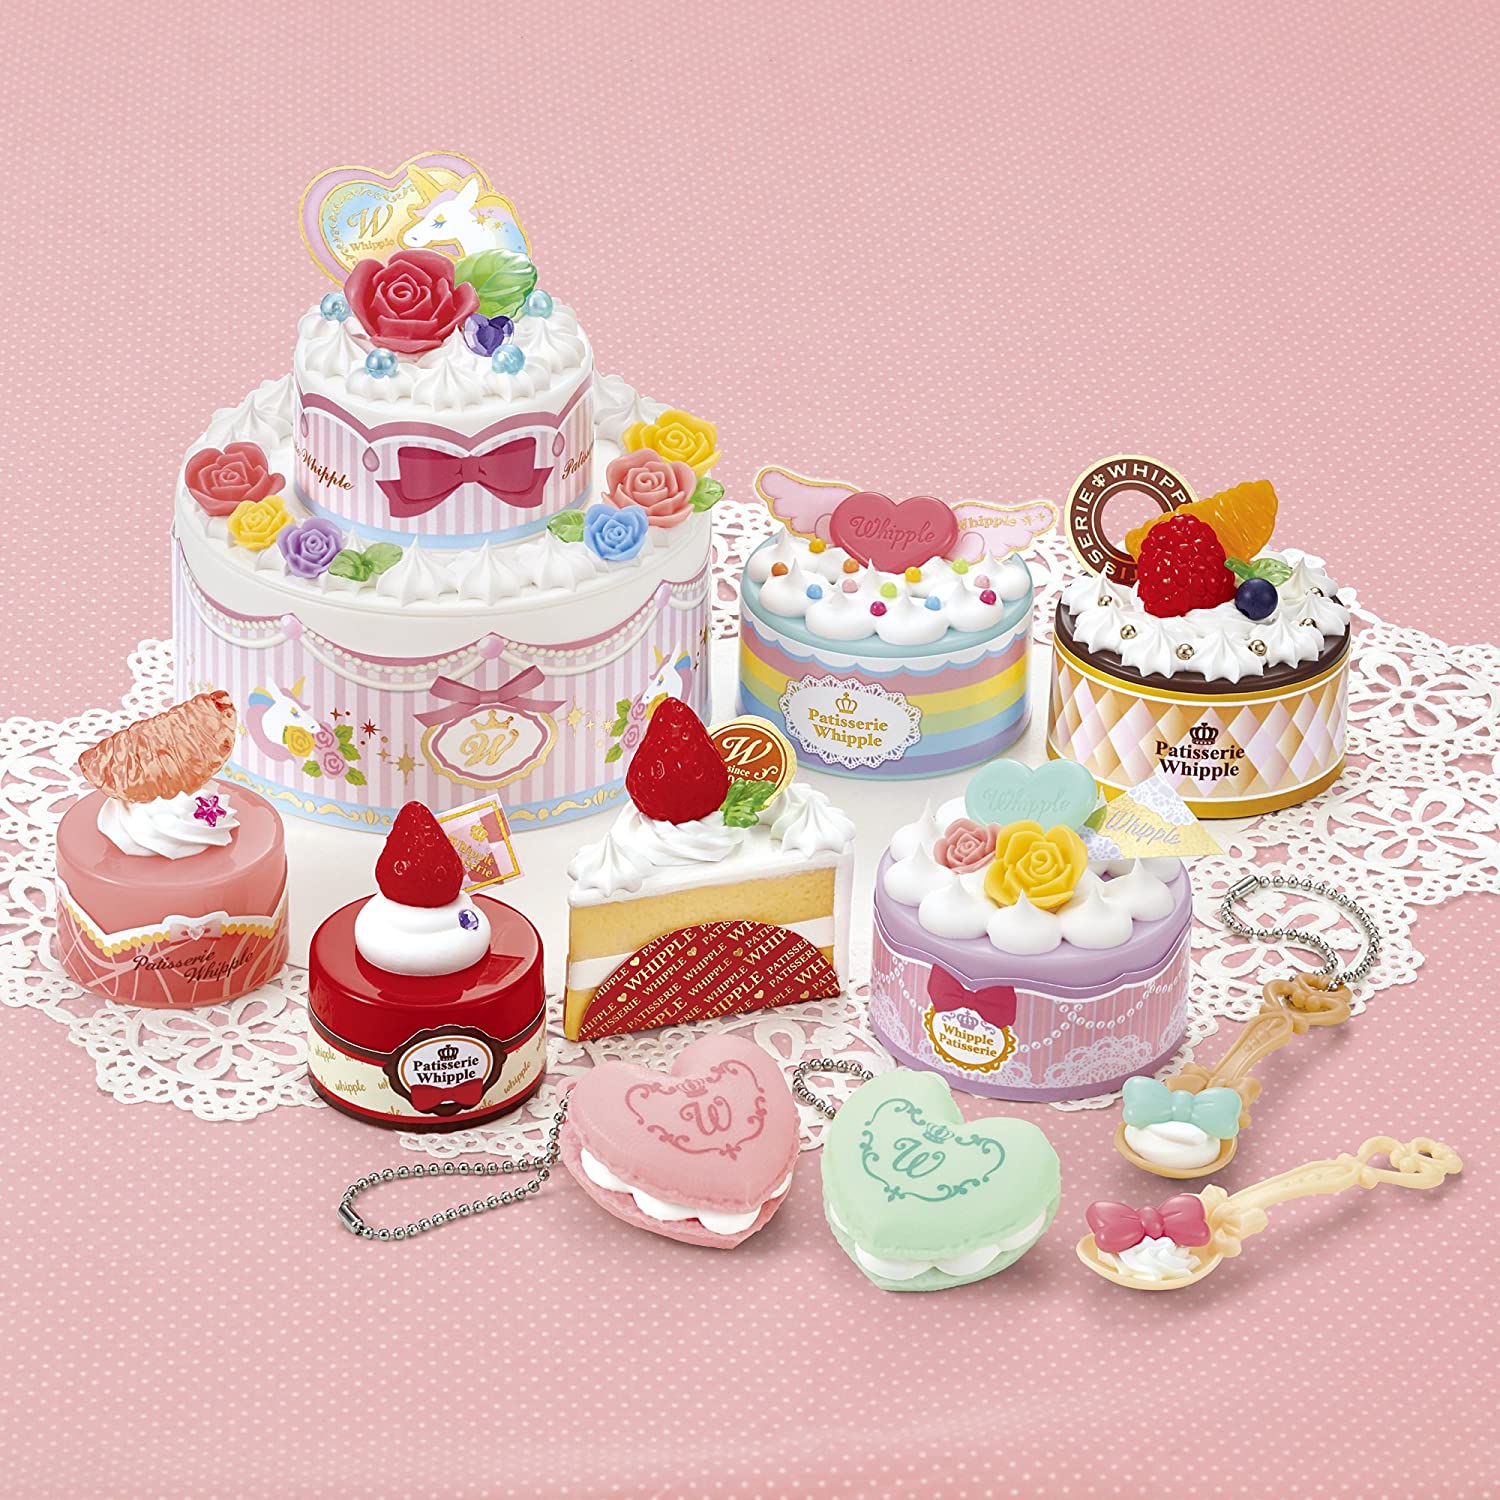 Decoden Sweets Kit! Whipple Patisserie Debut, A Whole Kit Full of